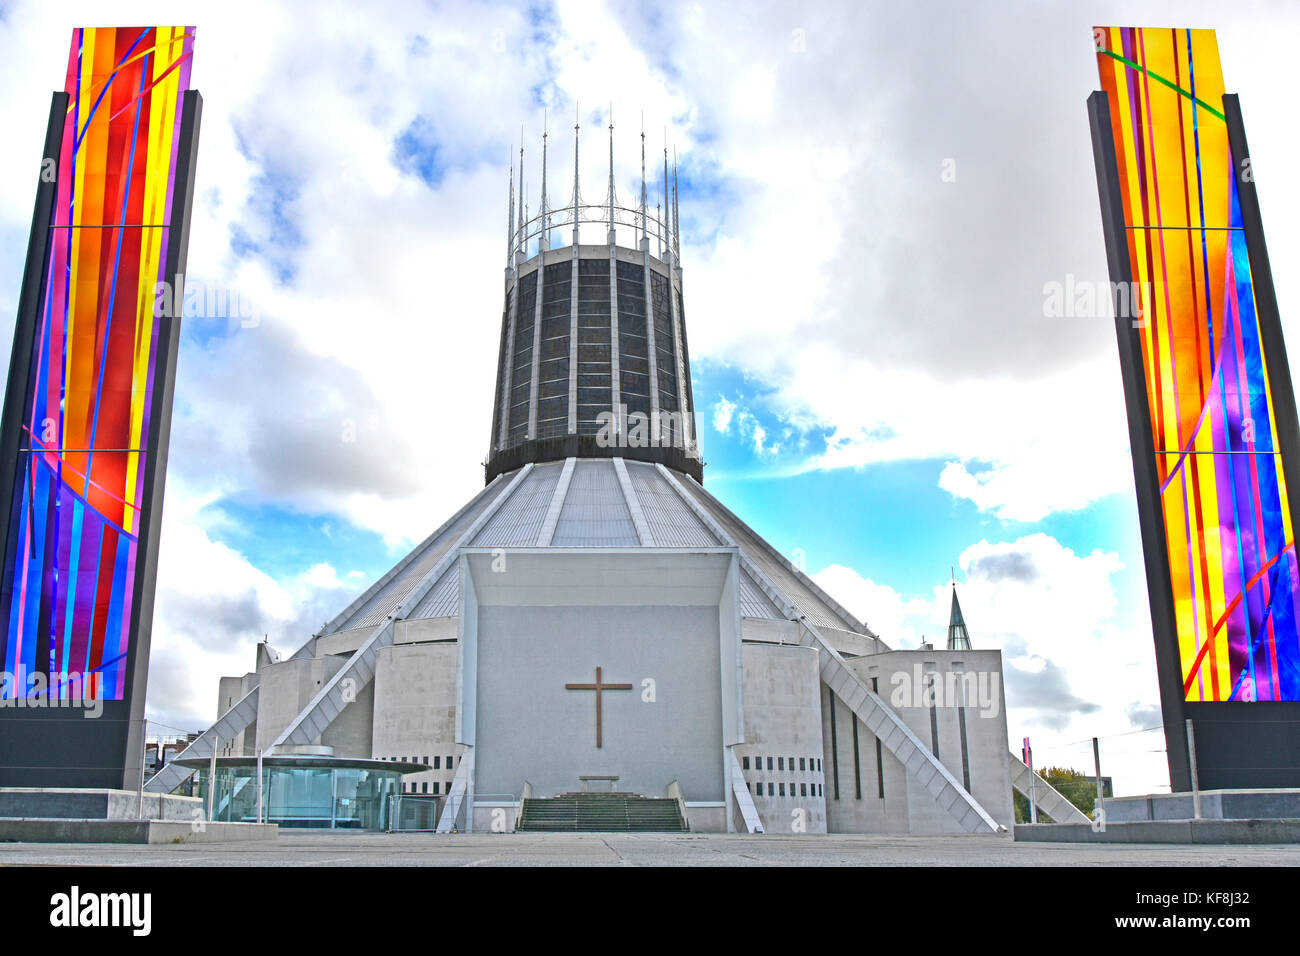 Liverpool Metropolitan Cathedral modern architecture & design of the Catholic church exterior flanked by stained glass panels Merseyside England UK Stock Photo